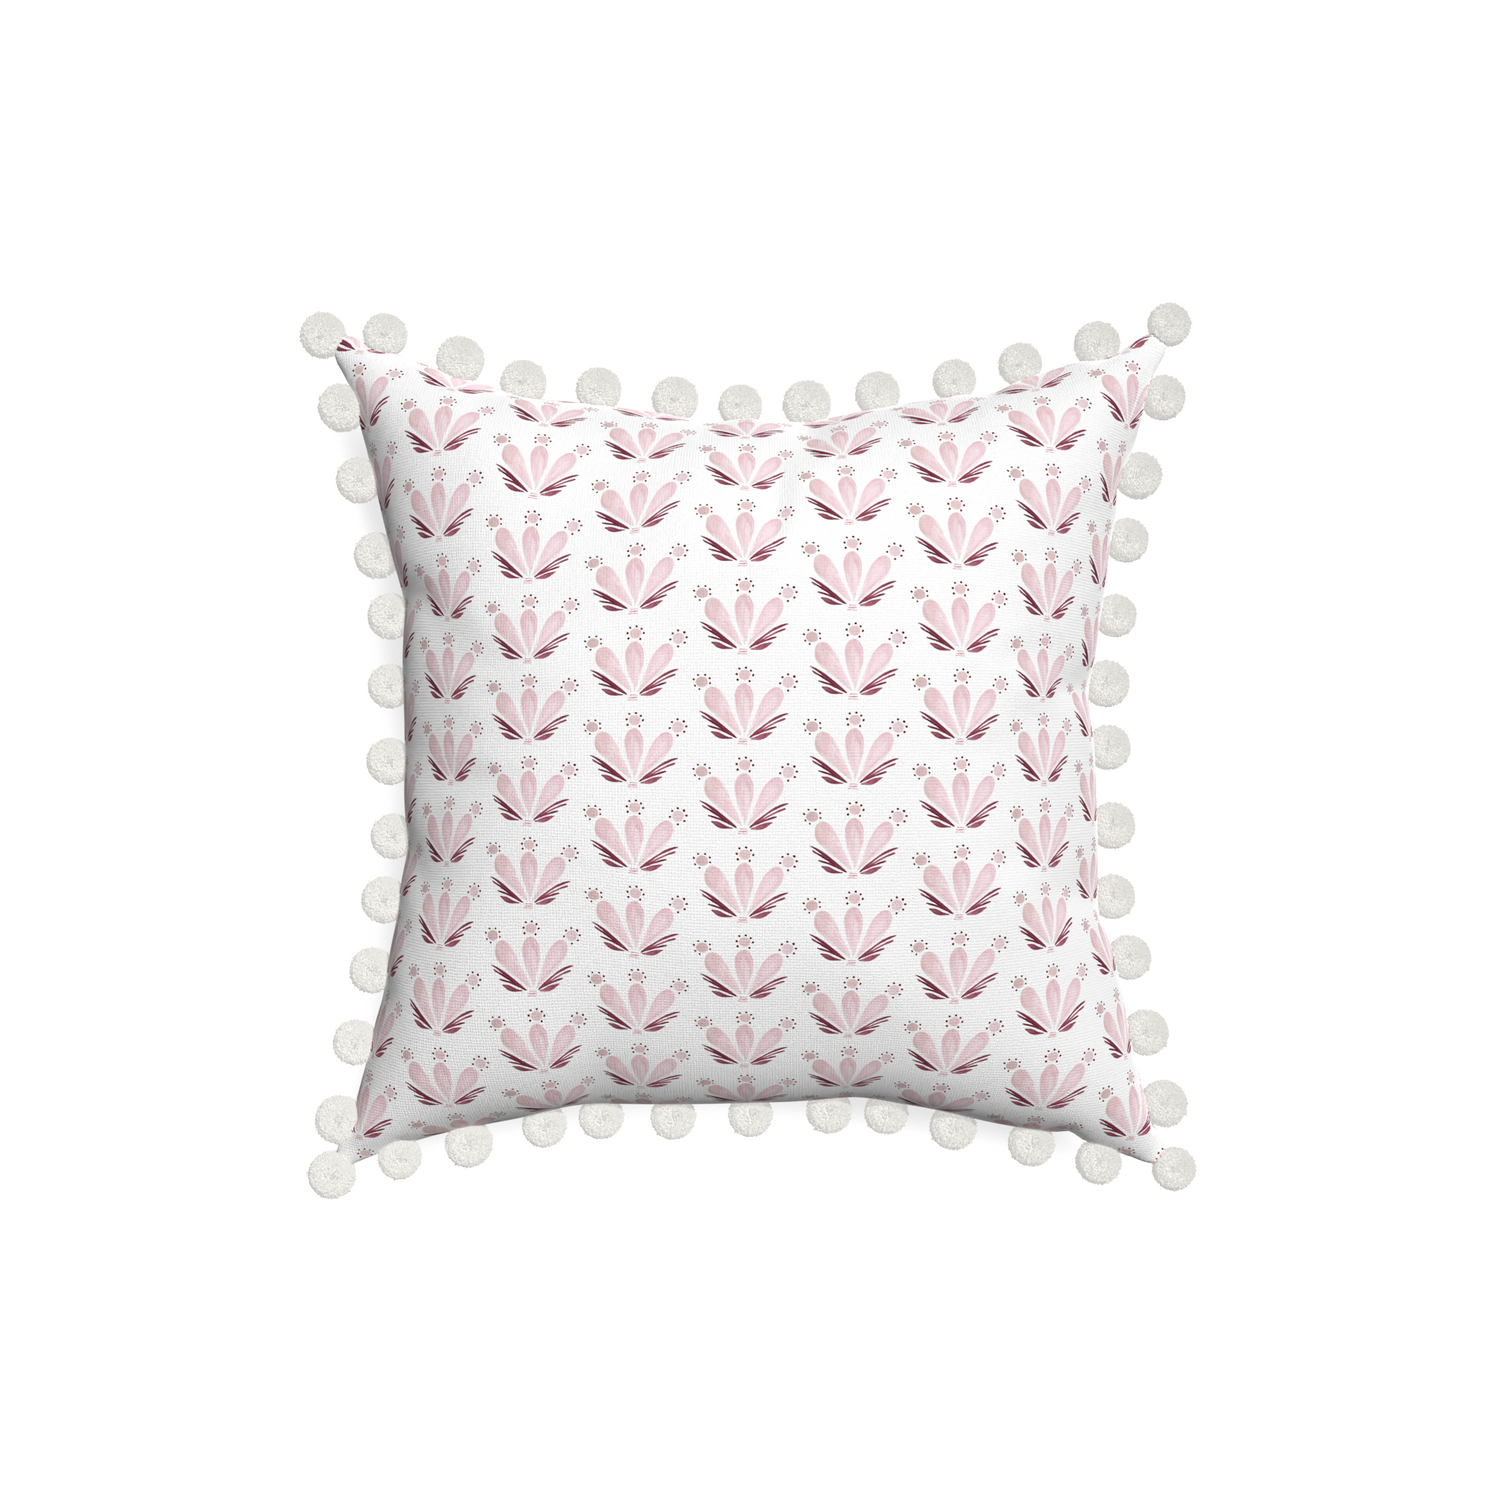 18-square serena pink custom pillow with snow pom pom on white background